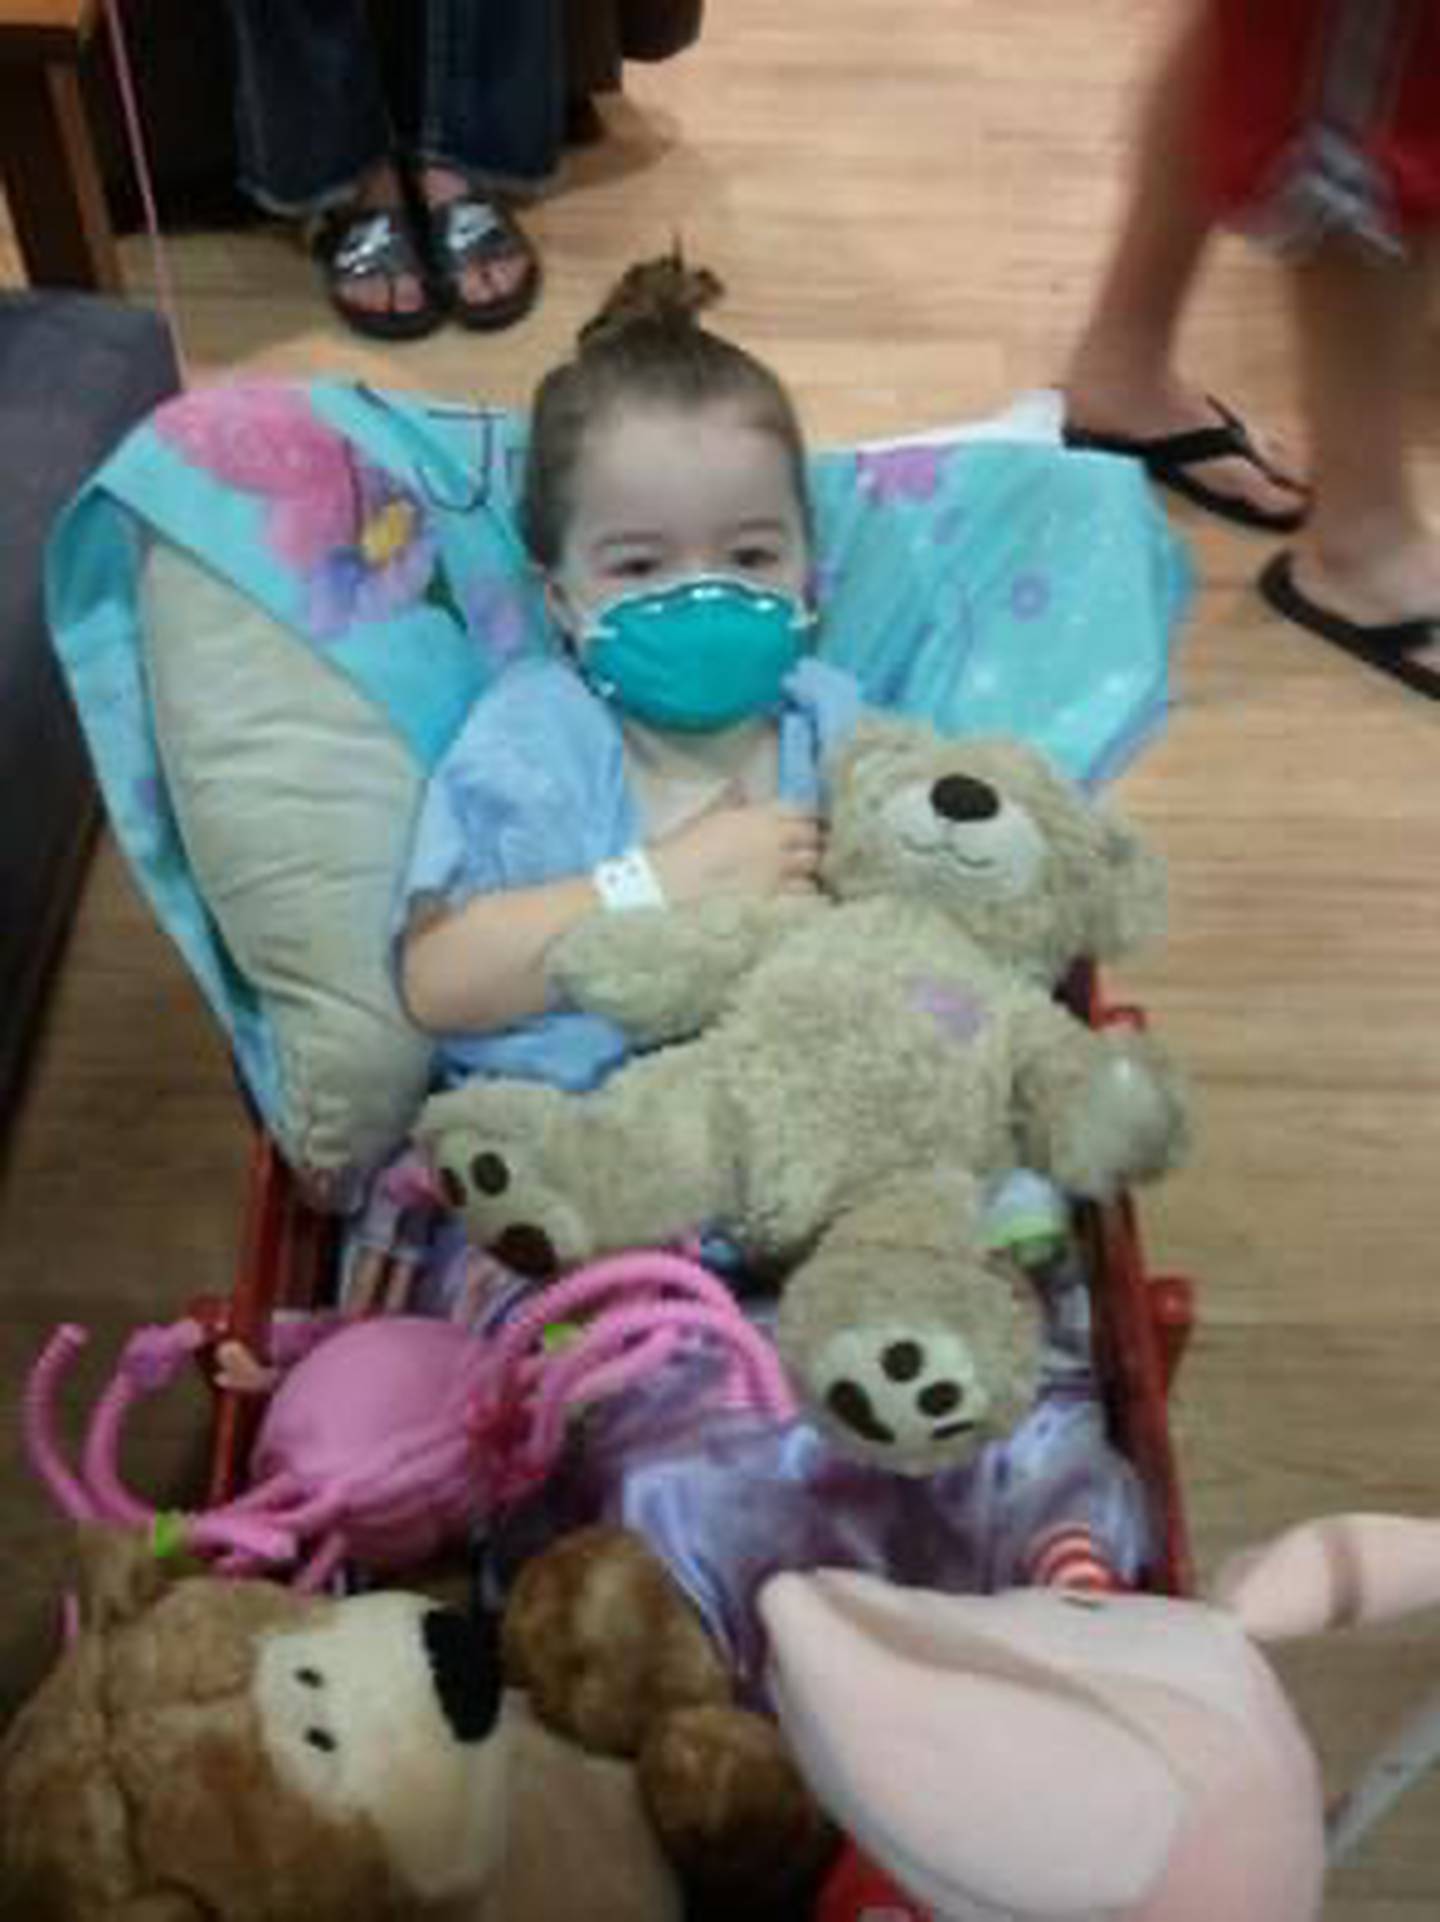 Bella Clevenger and her favorite stuffed animals in her little red wagon while undergoing treatment for leukemia.